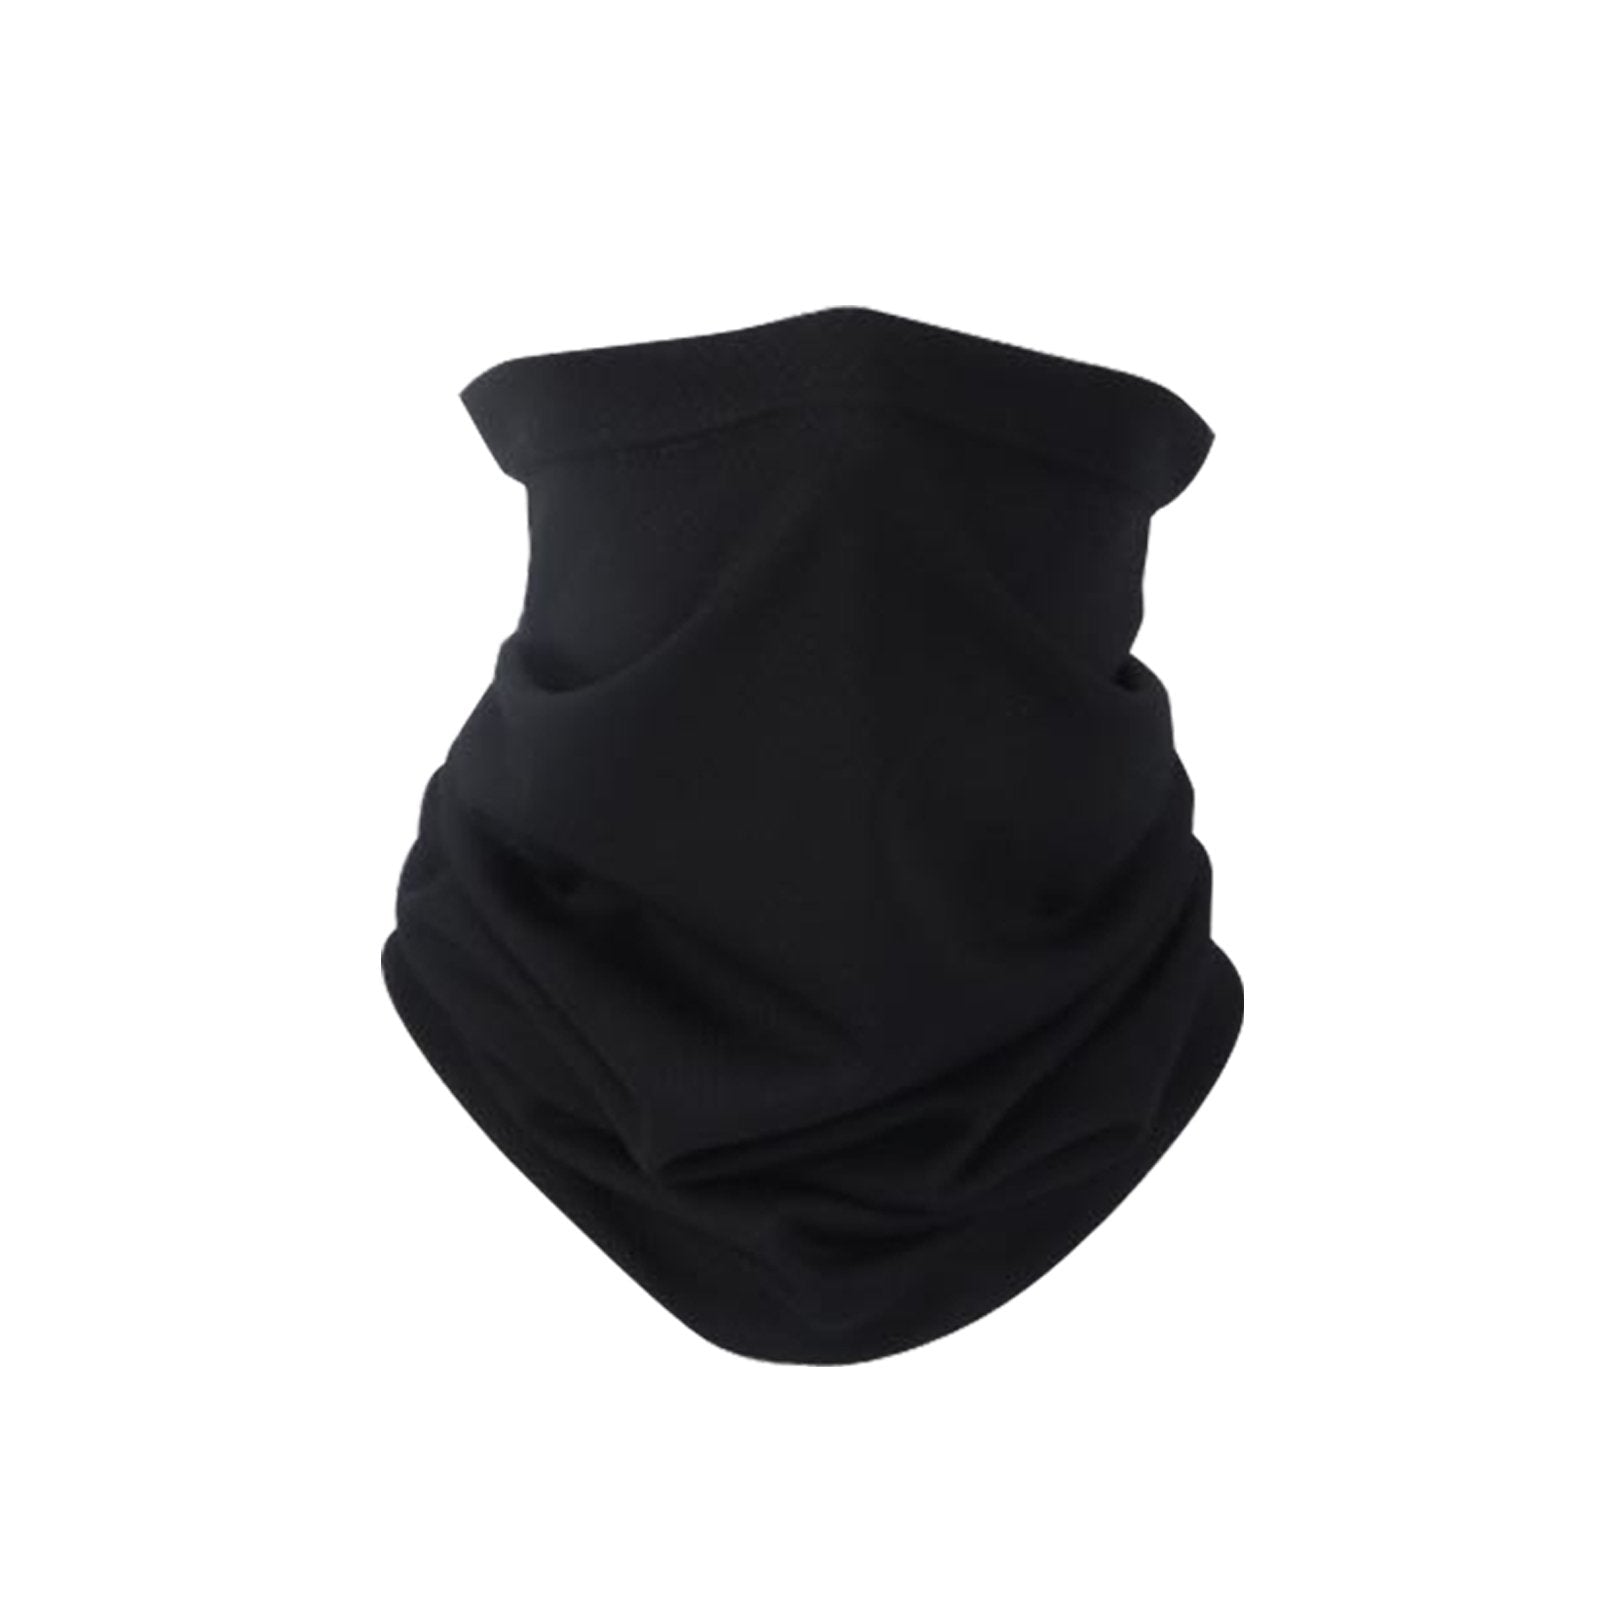 Solid Black Neck Gaiter Face Mask Reusable, Washable Bandana /Head Wrap Scarf-1pcs/Pack - Cowgirl Wear